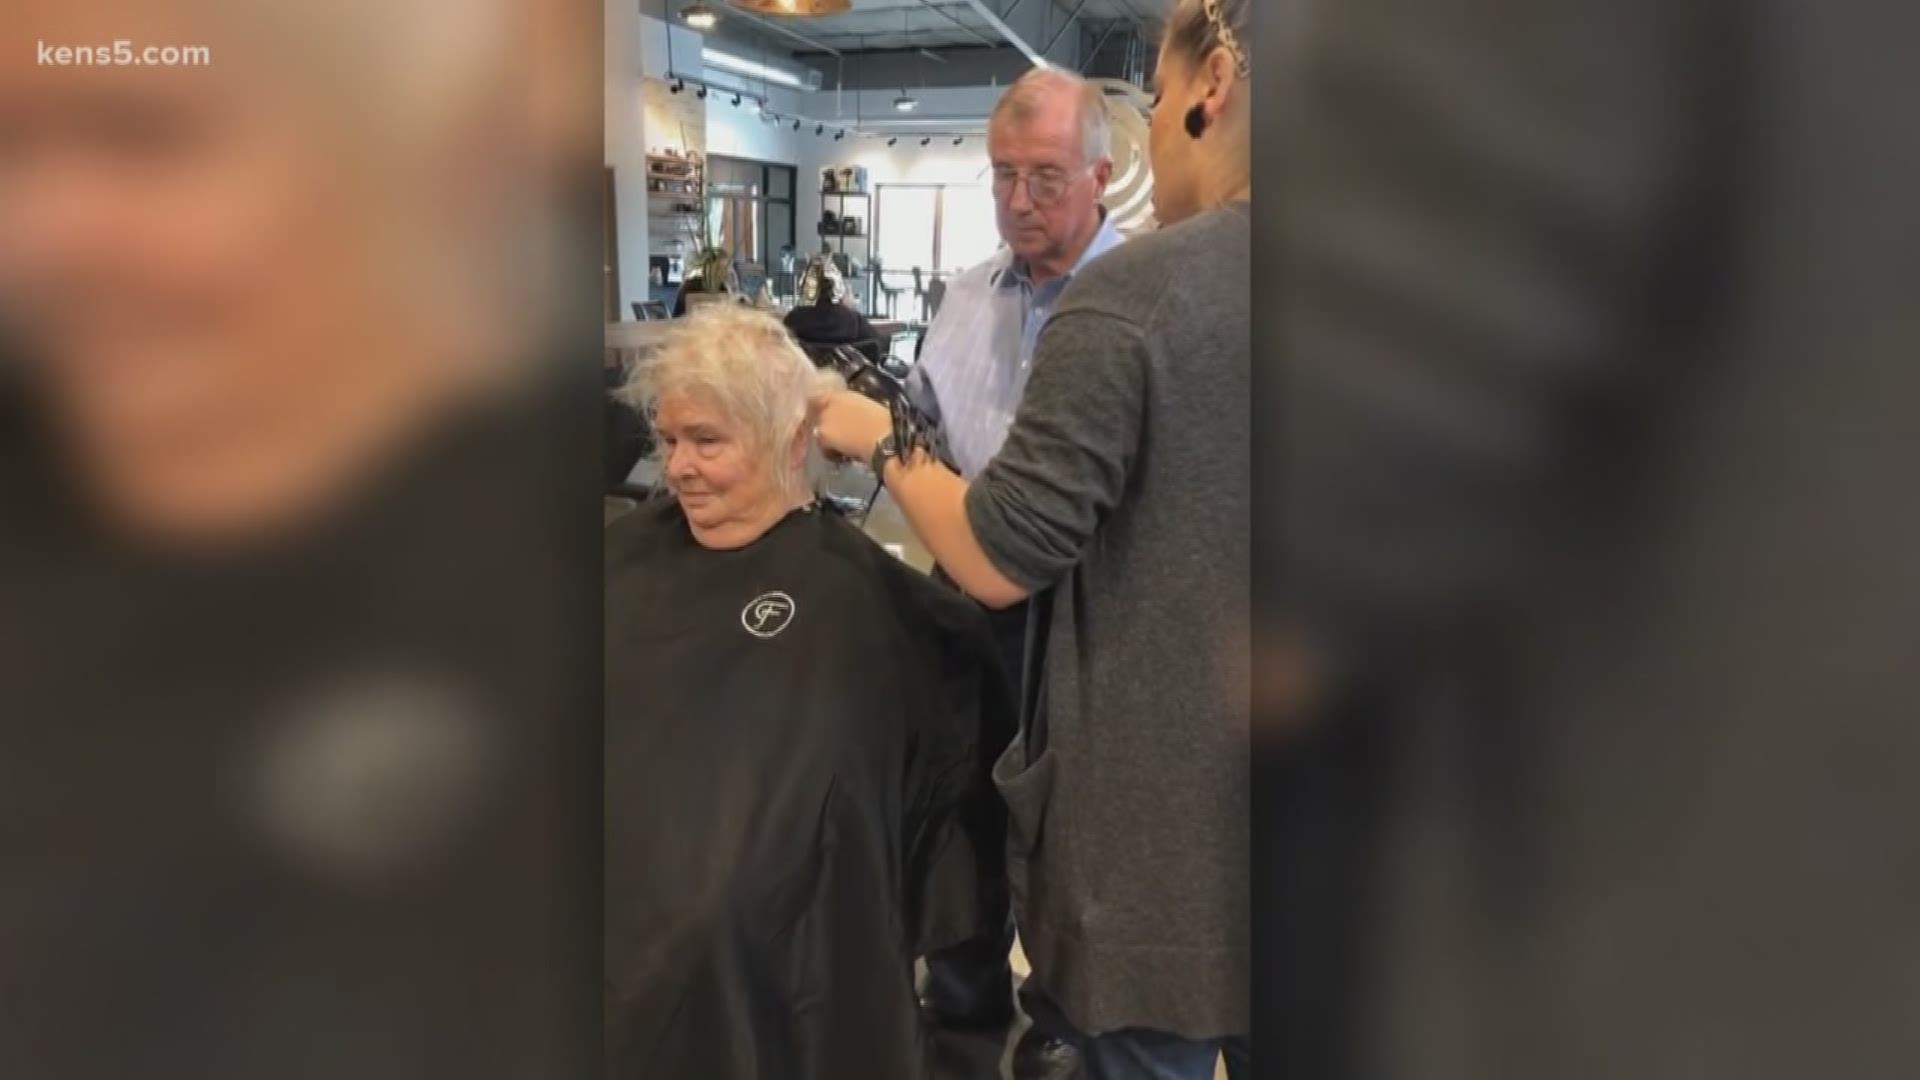 After a man was captured on video with a hairstylist learning to do his wife's hair, the video went viral.